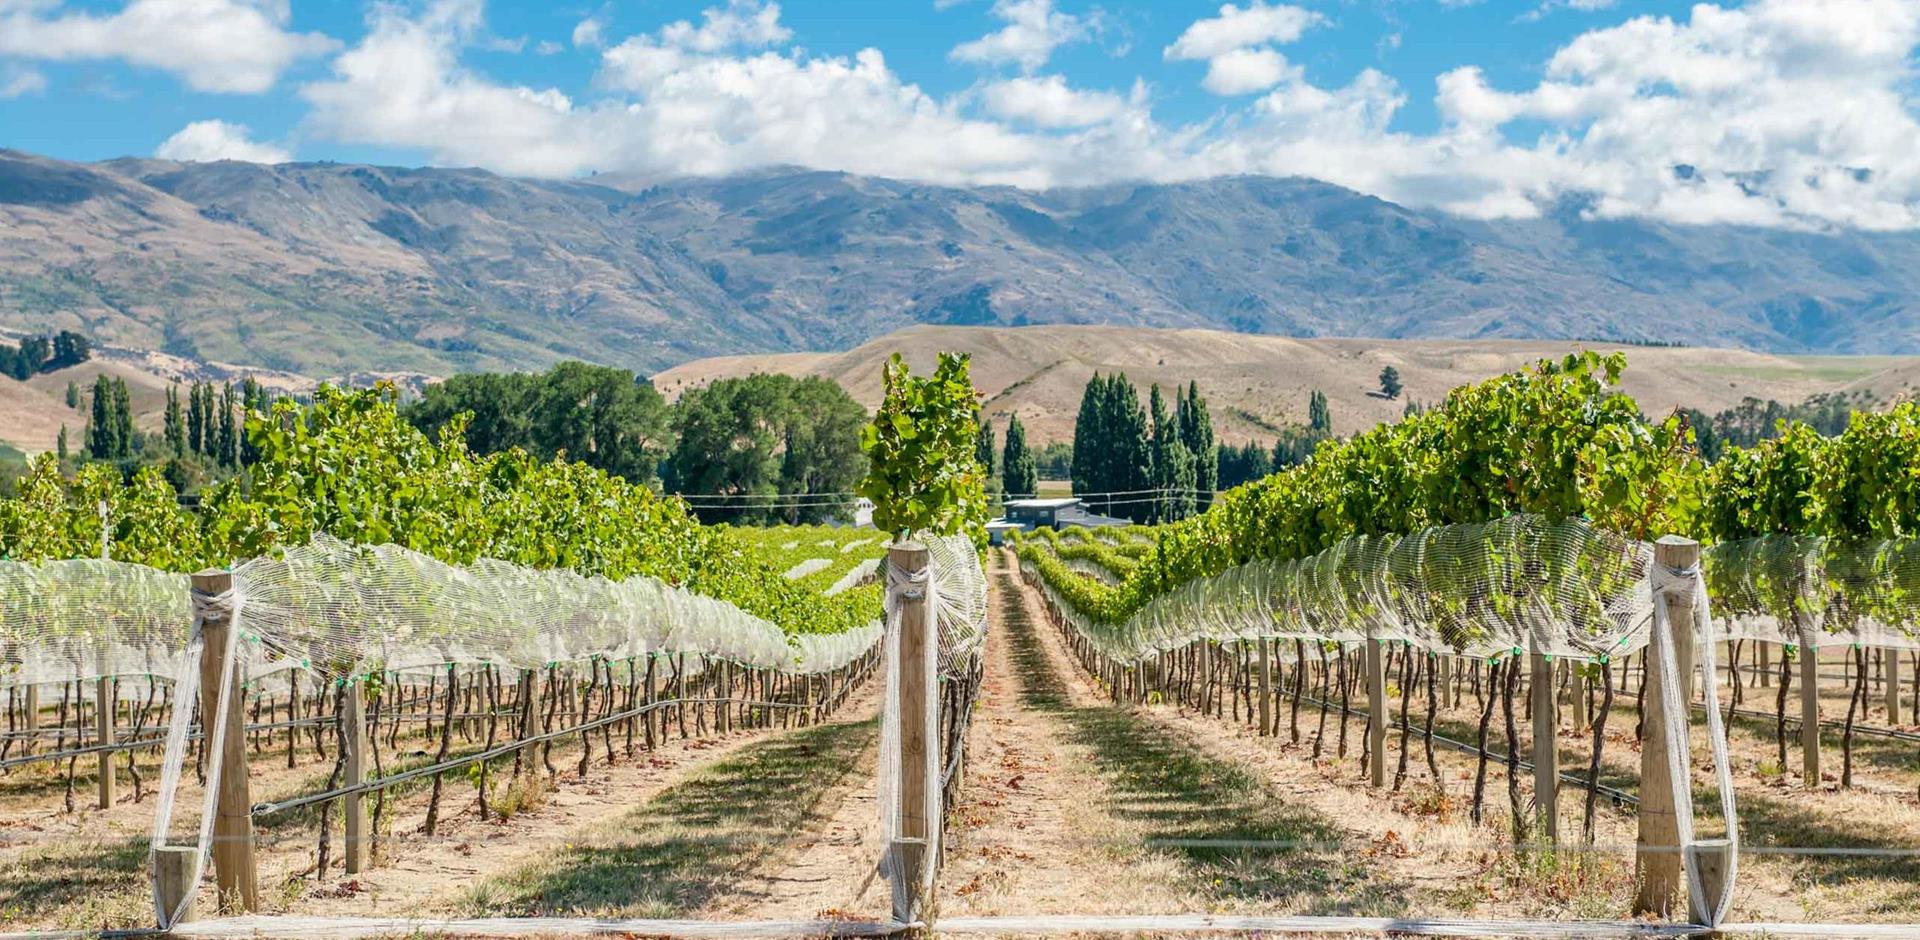 A&K New Zealand experience: Private wine tasting and cave tour